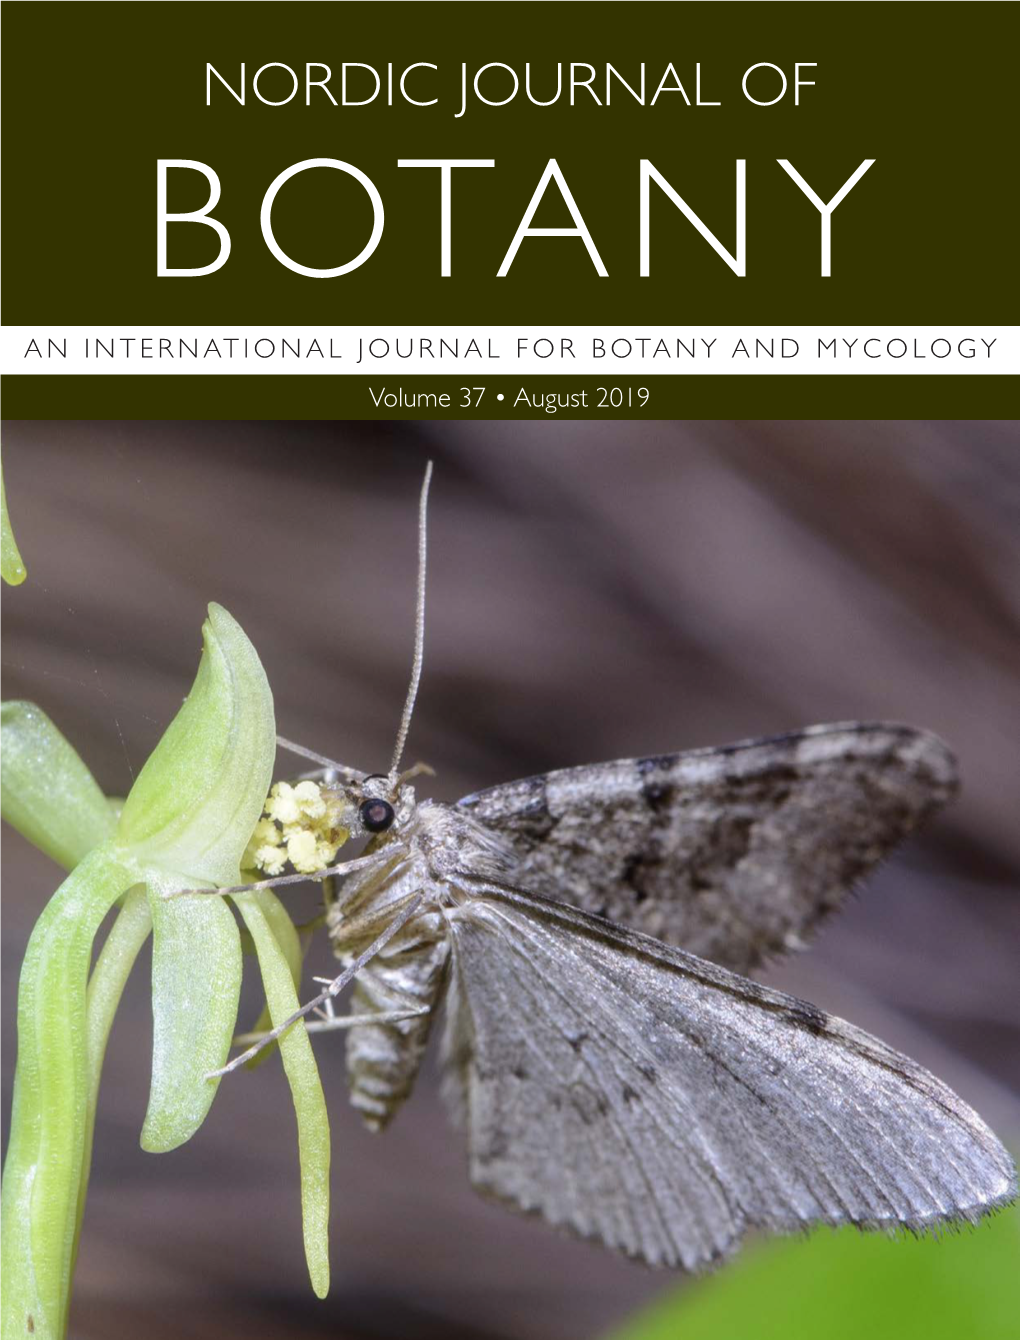 Pollination of Habenaria Tridactylites on the Canary Islands